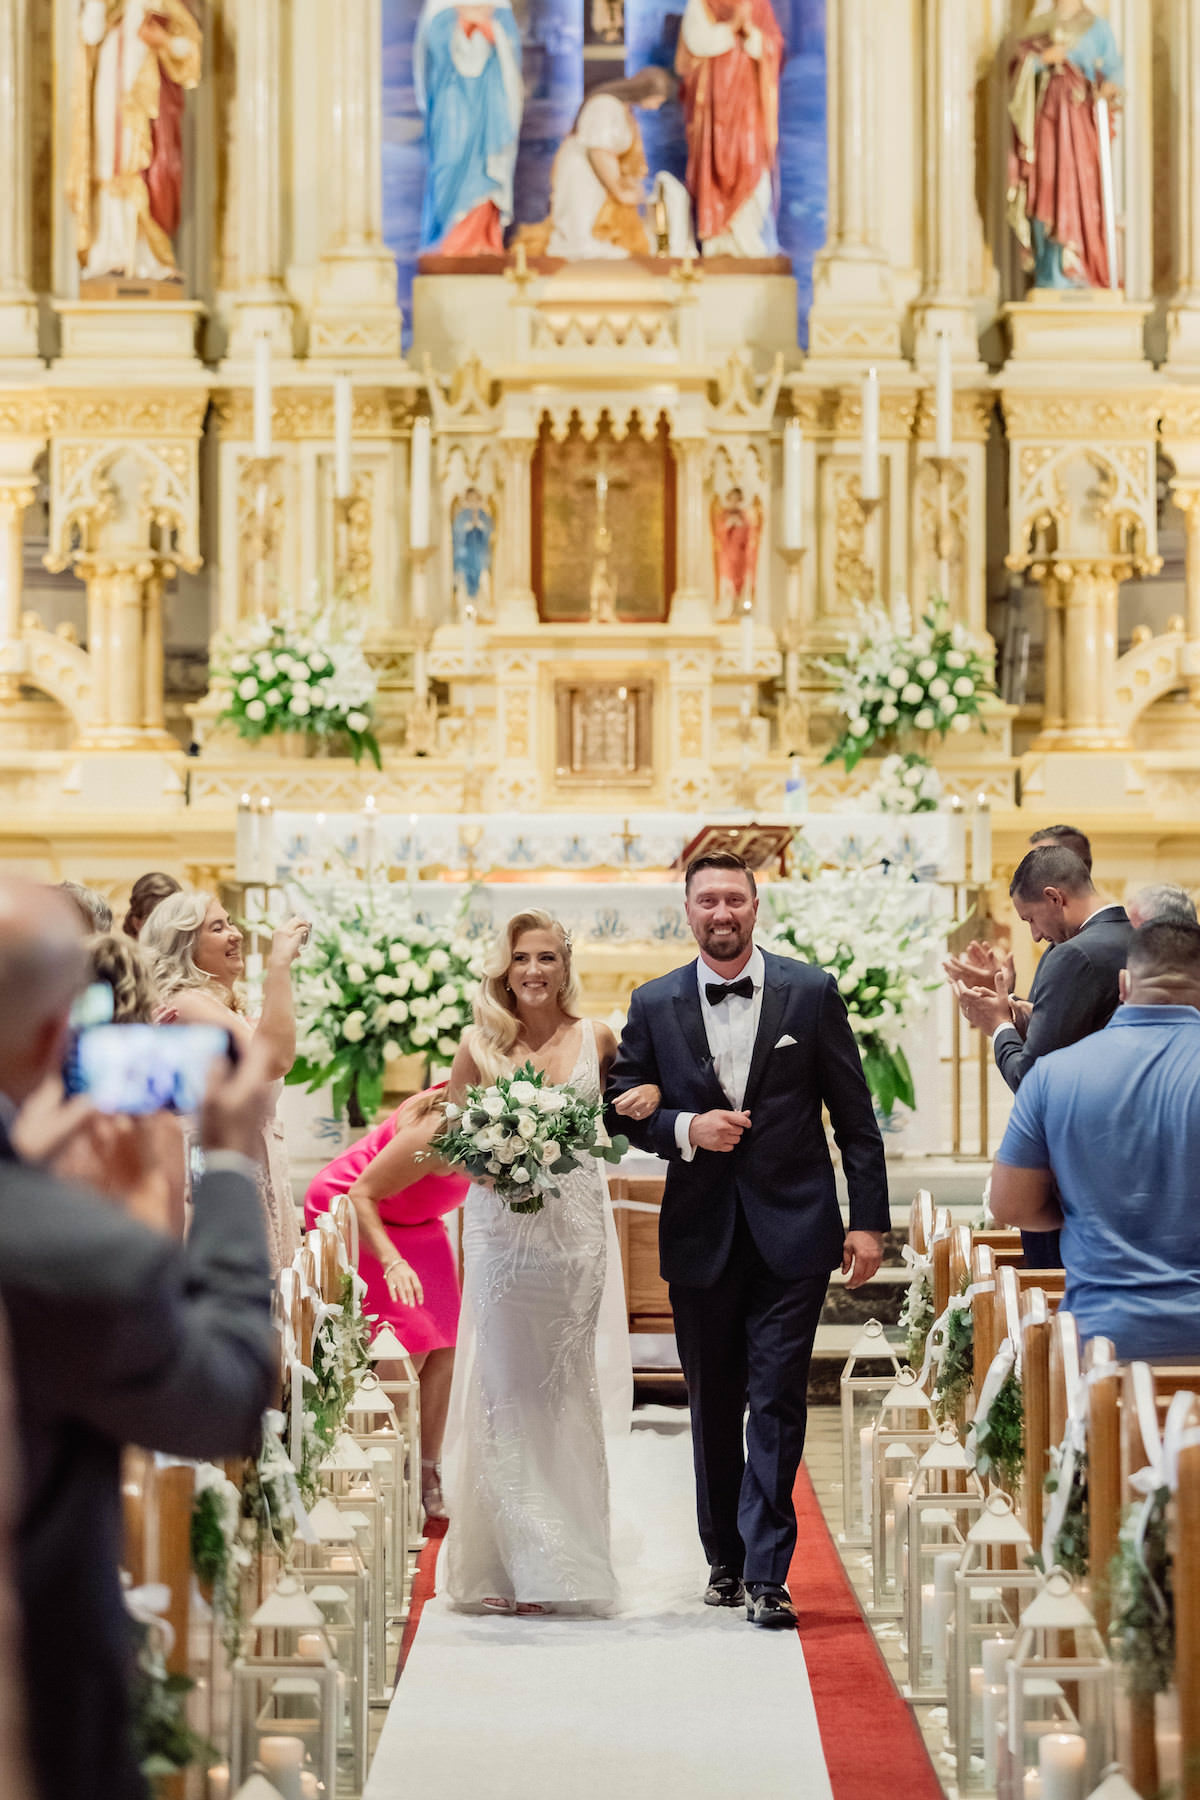 Church wedding ceremony - Photography: Charming Images